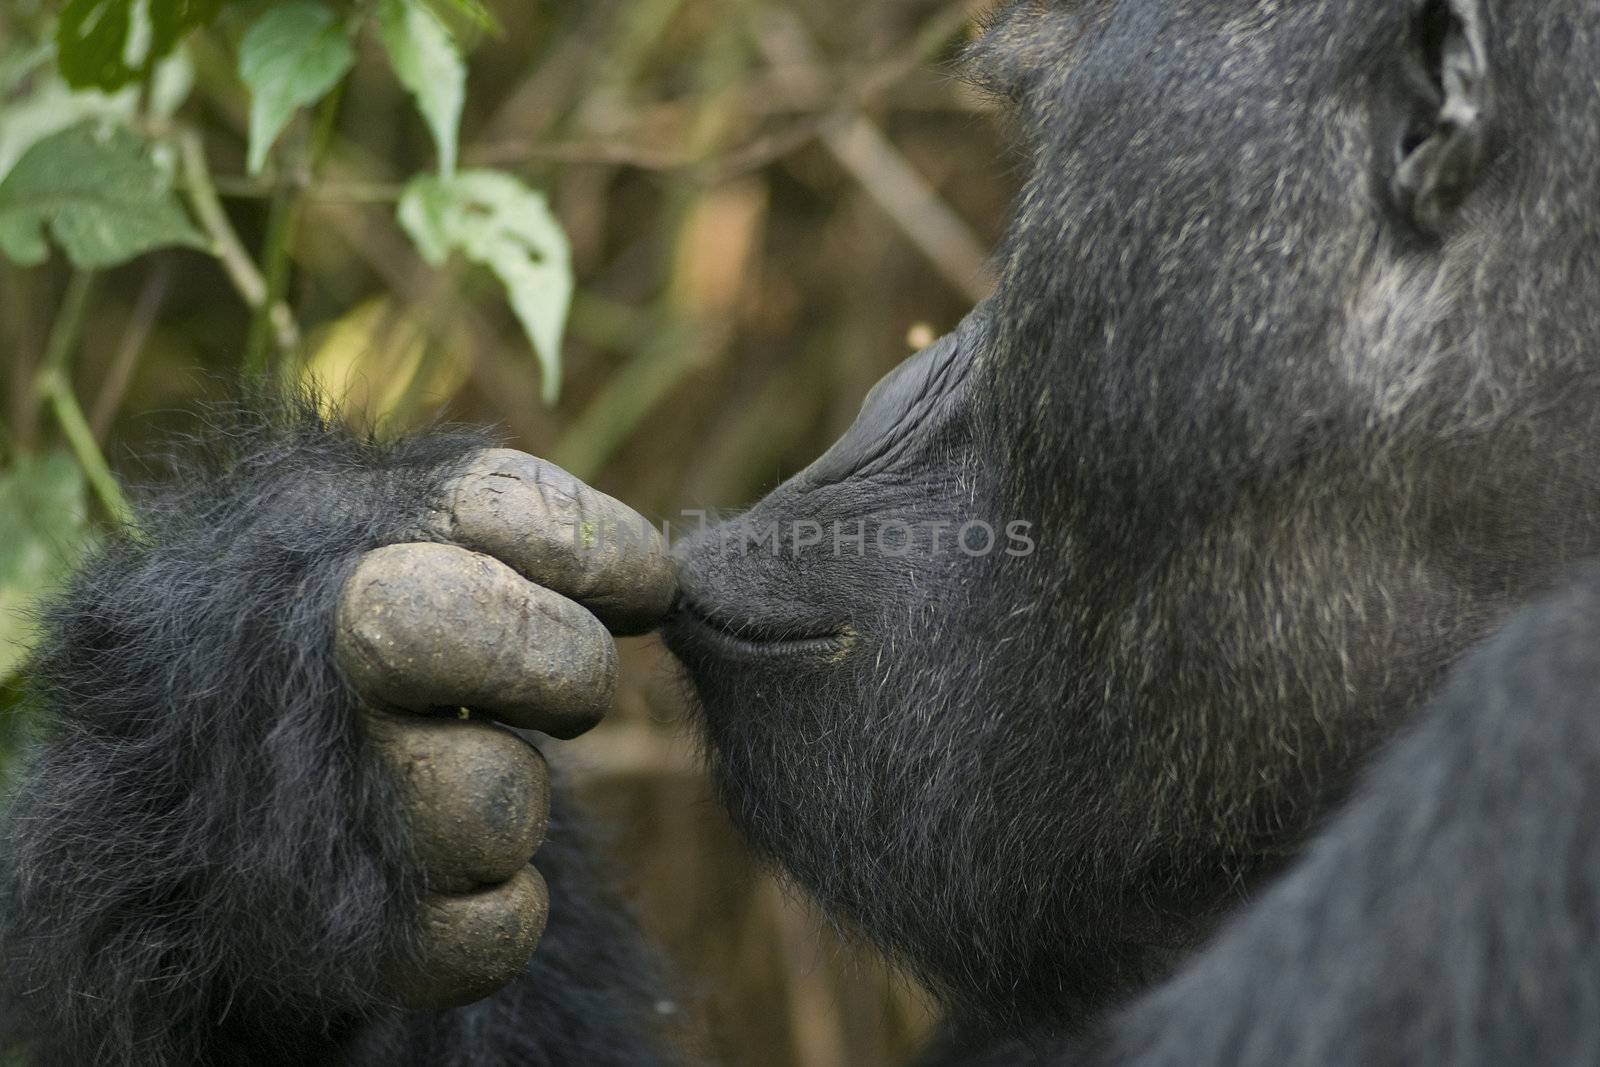 Closeup of the face of a silver back gorilla by stockbymh